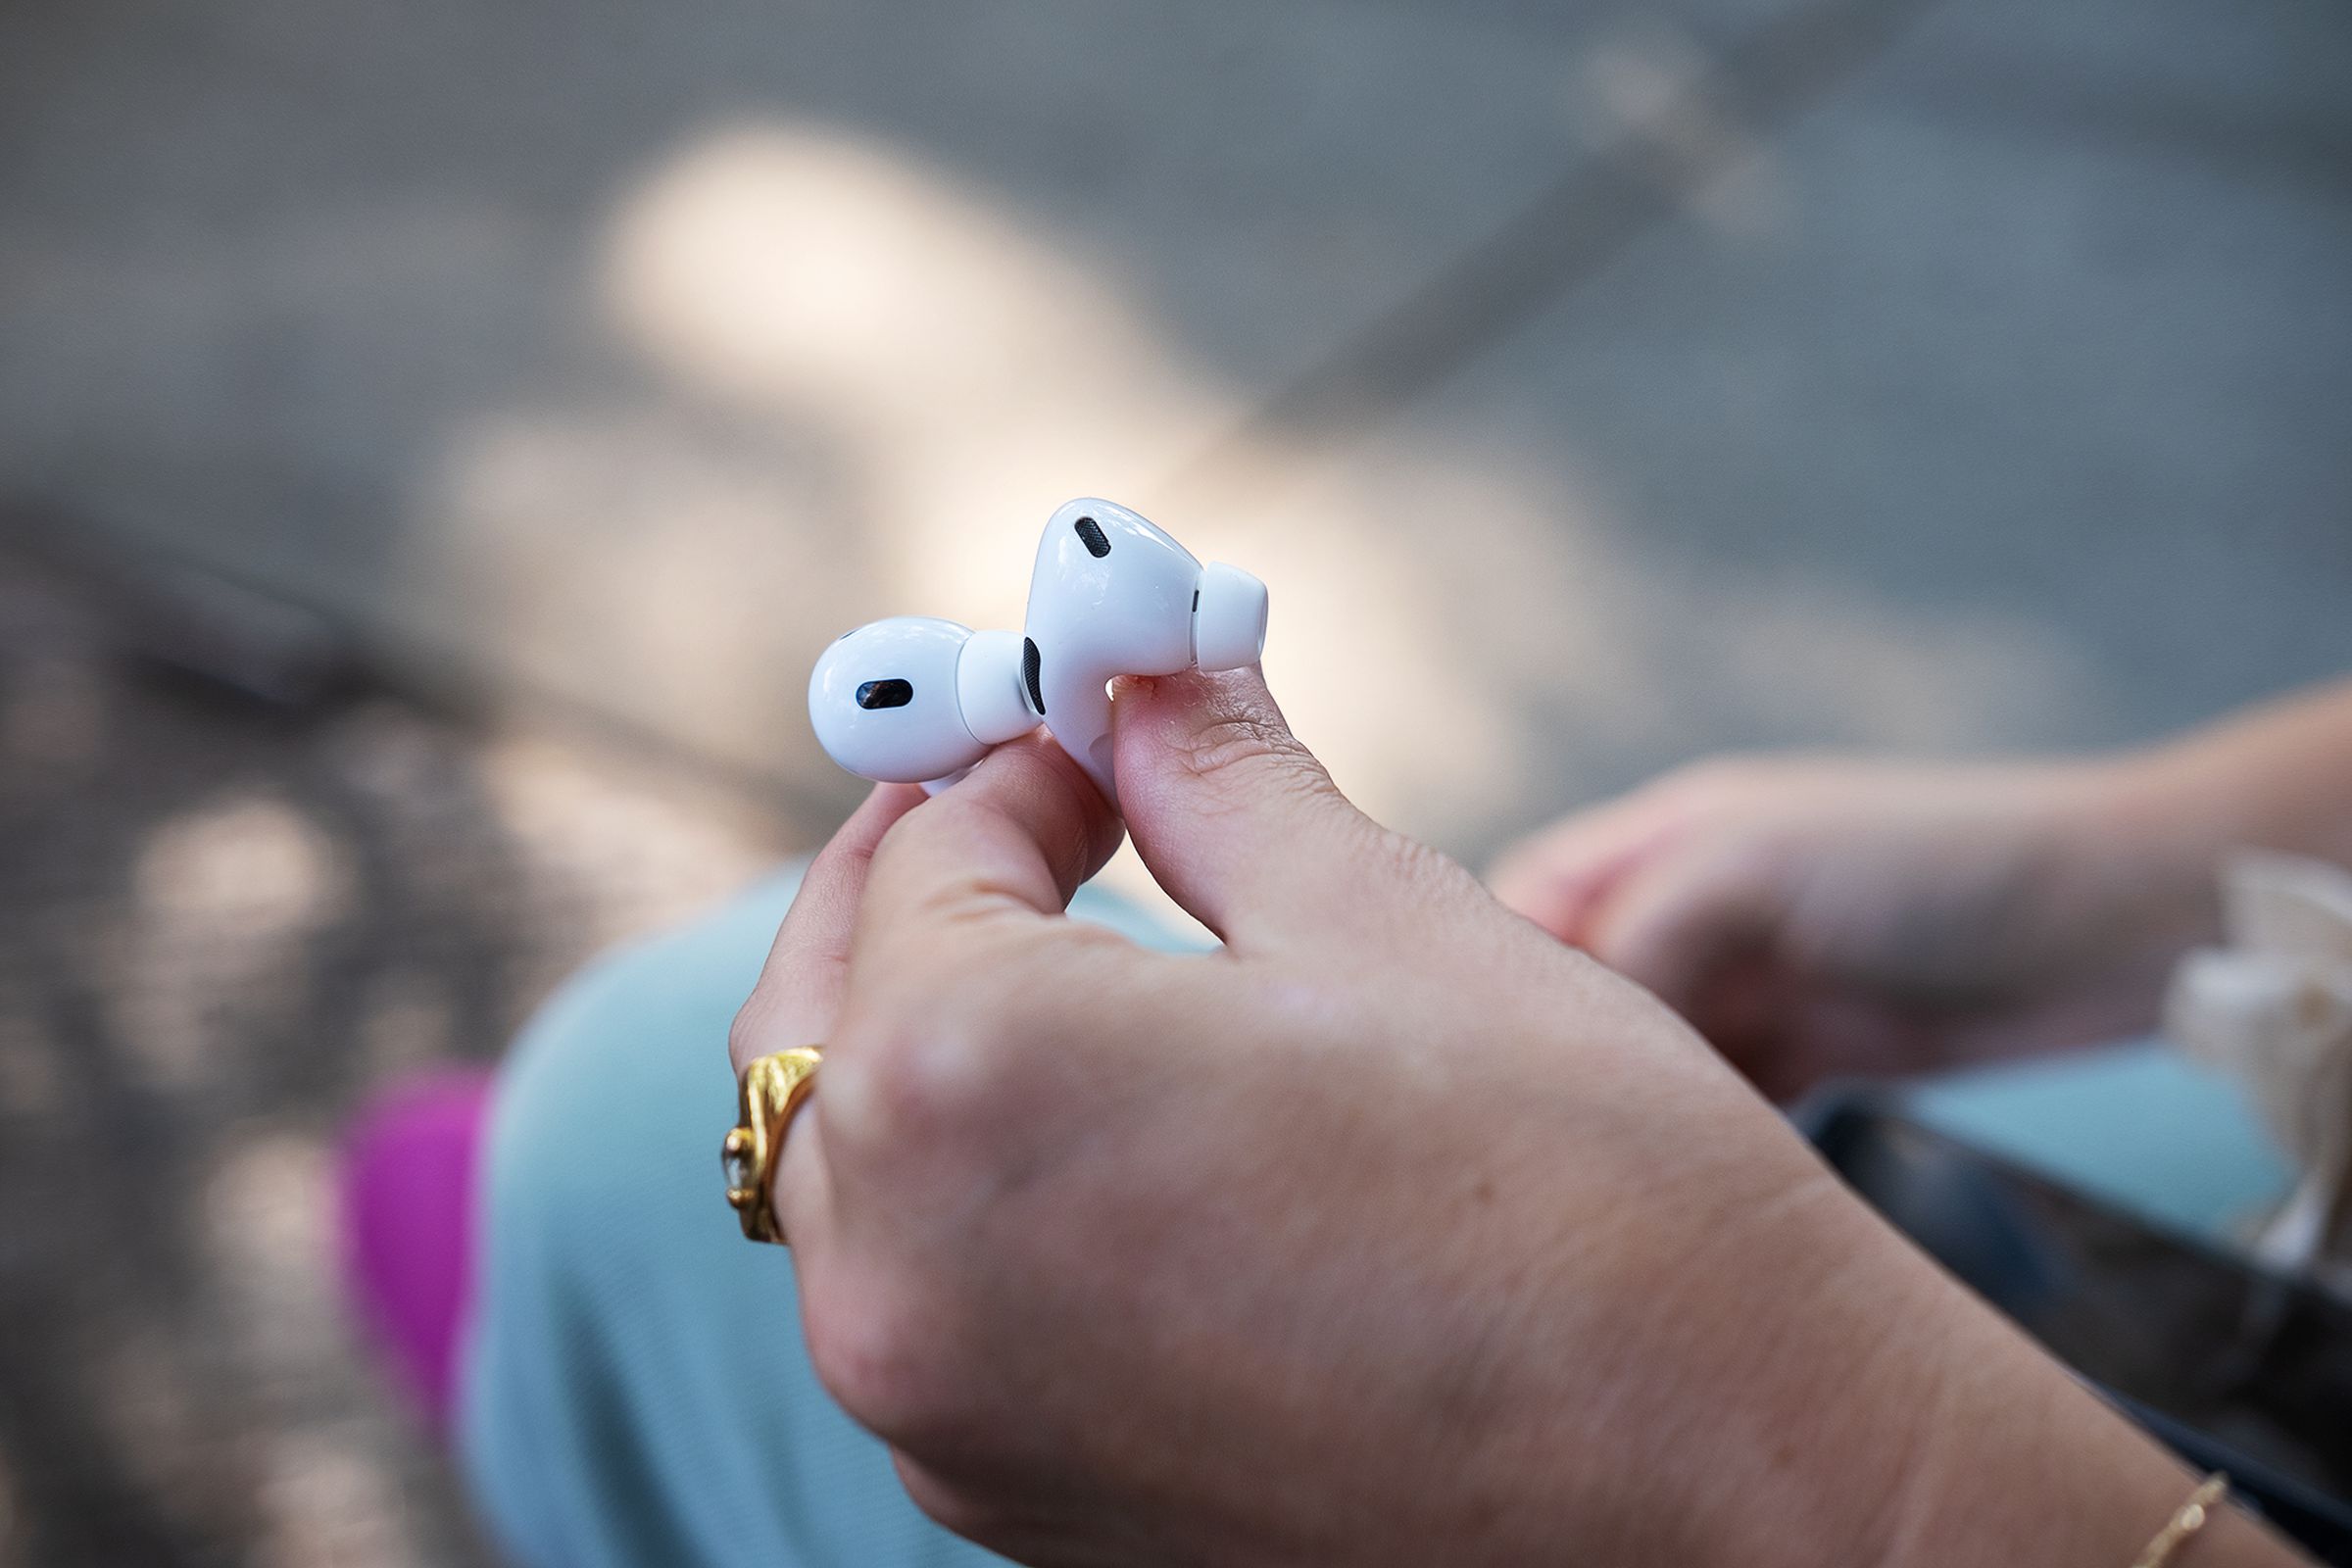 A person holds two AirPods Pro earbuds in their hand.